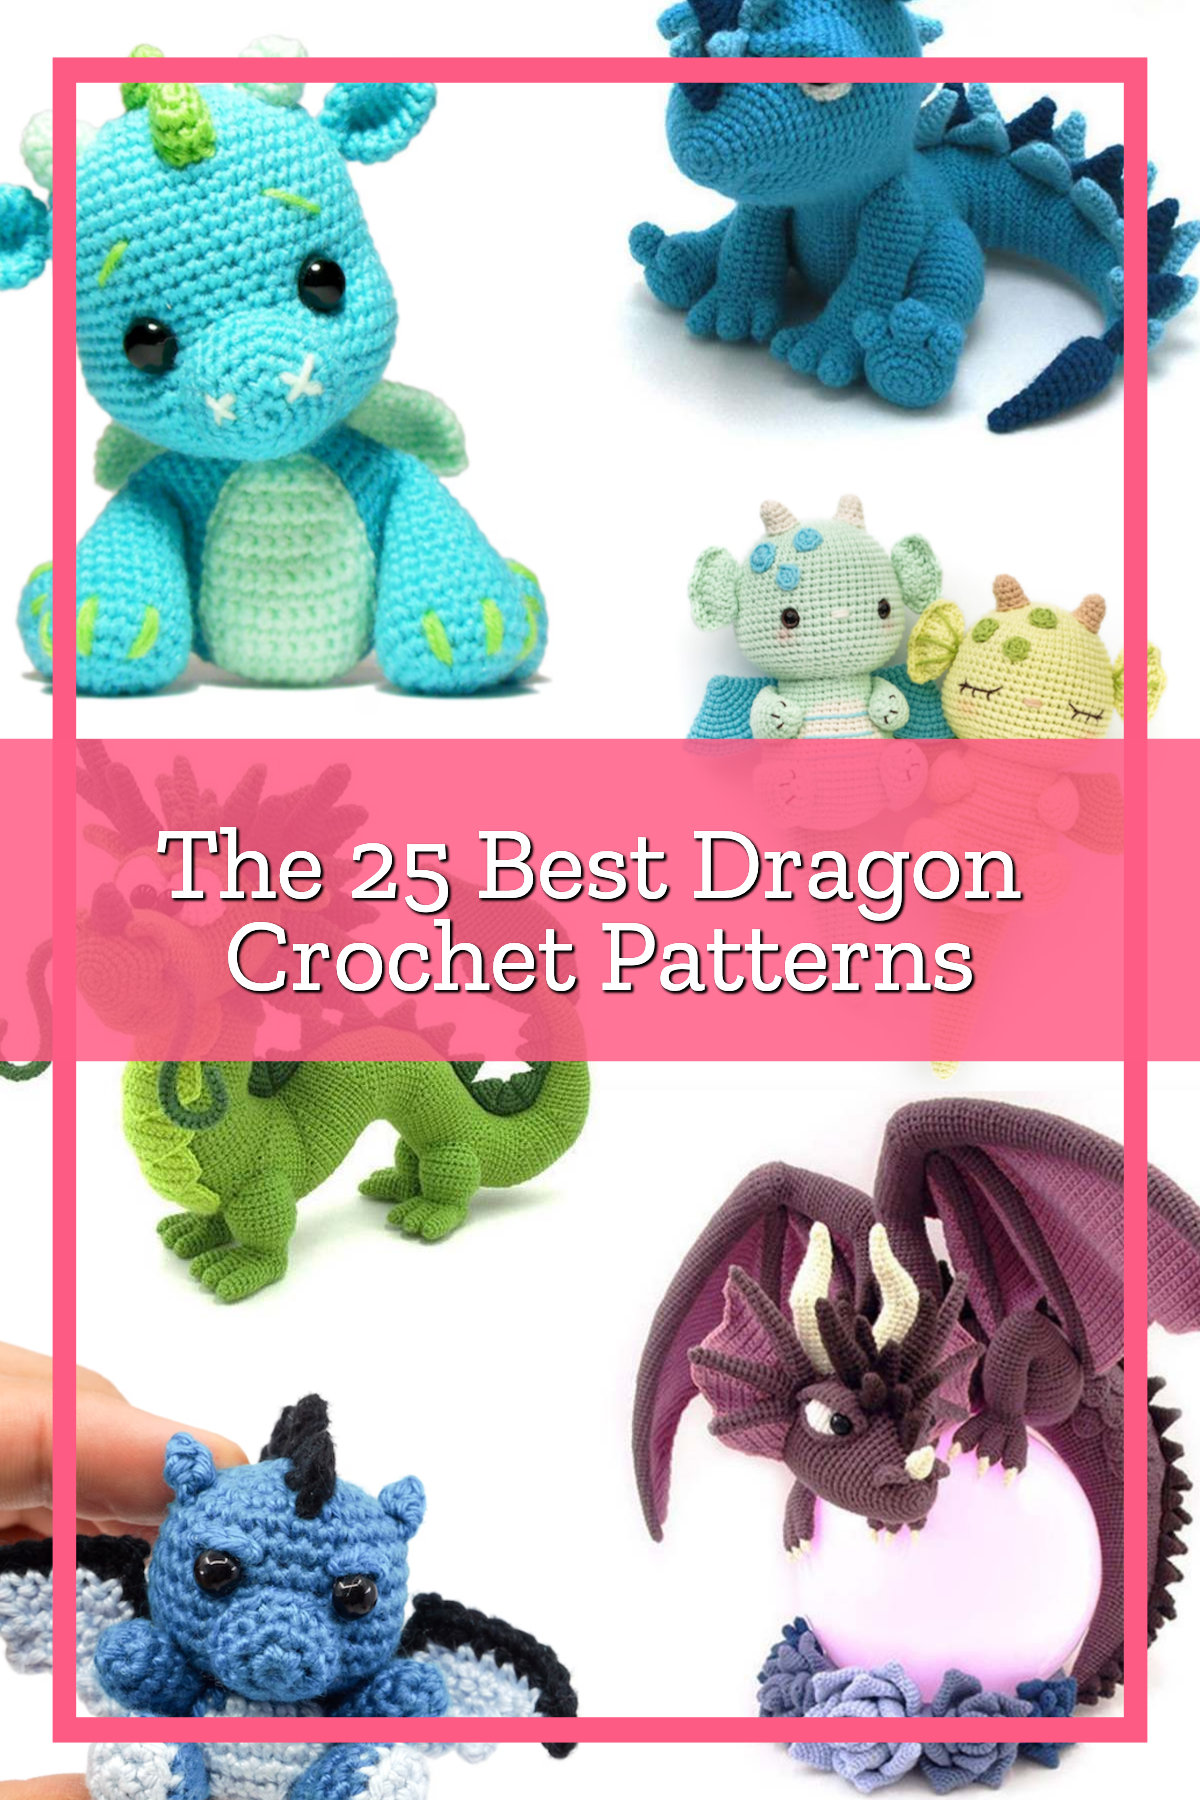 Get Inspired with 25 Quick and Easy Crochet Patterns